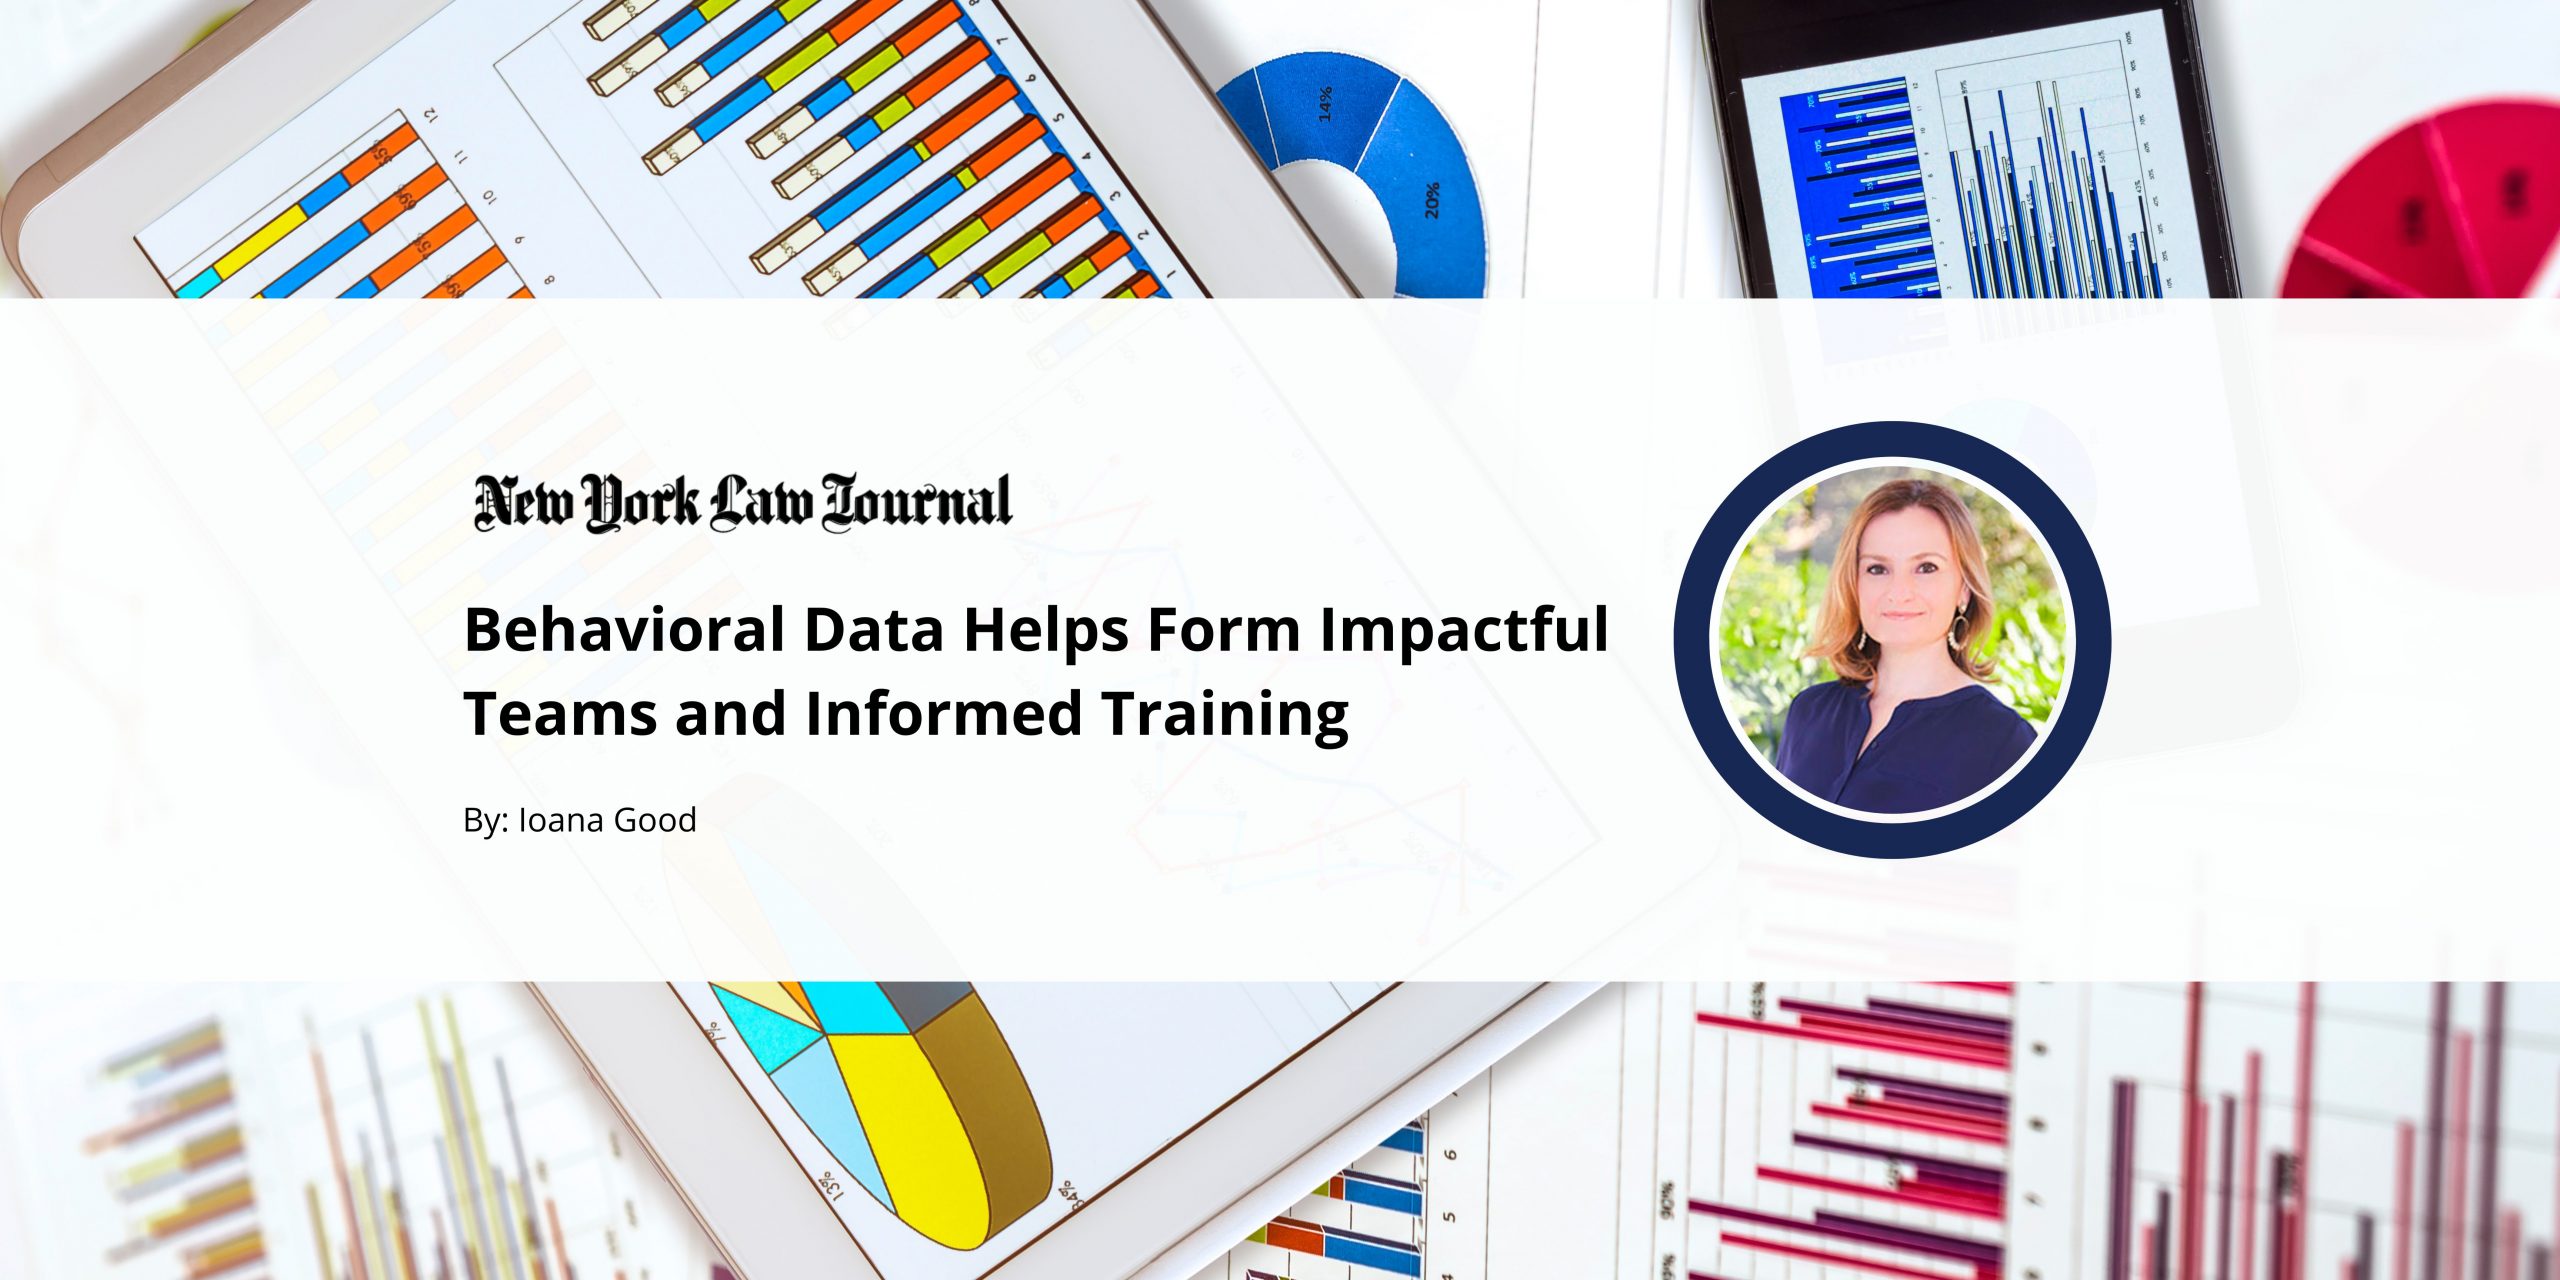 Featured image for “Behavioral Data Helps Form Impactful Teams and Informed Training”